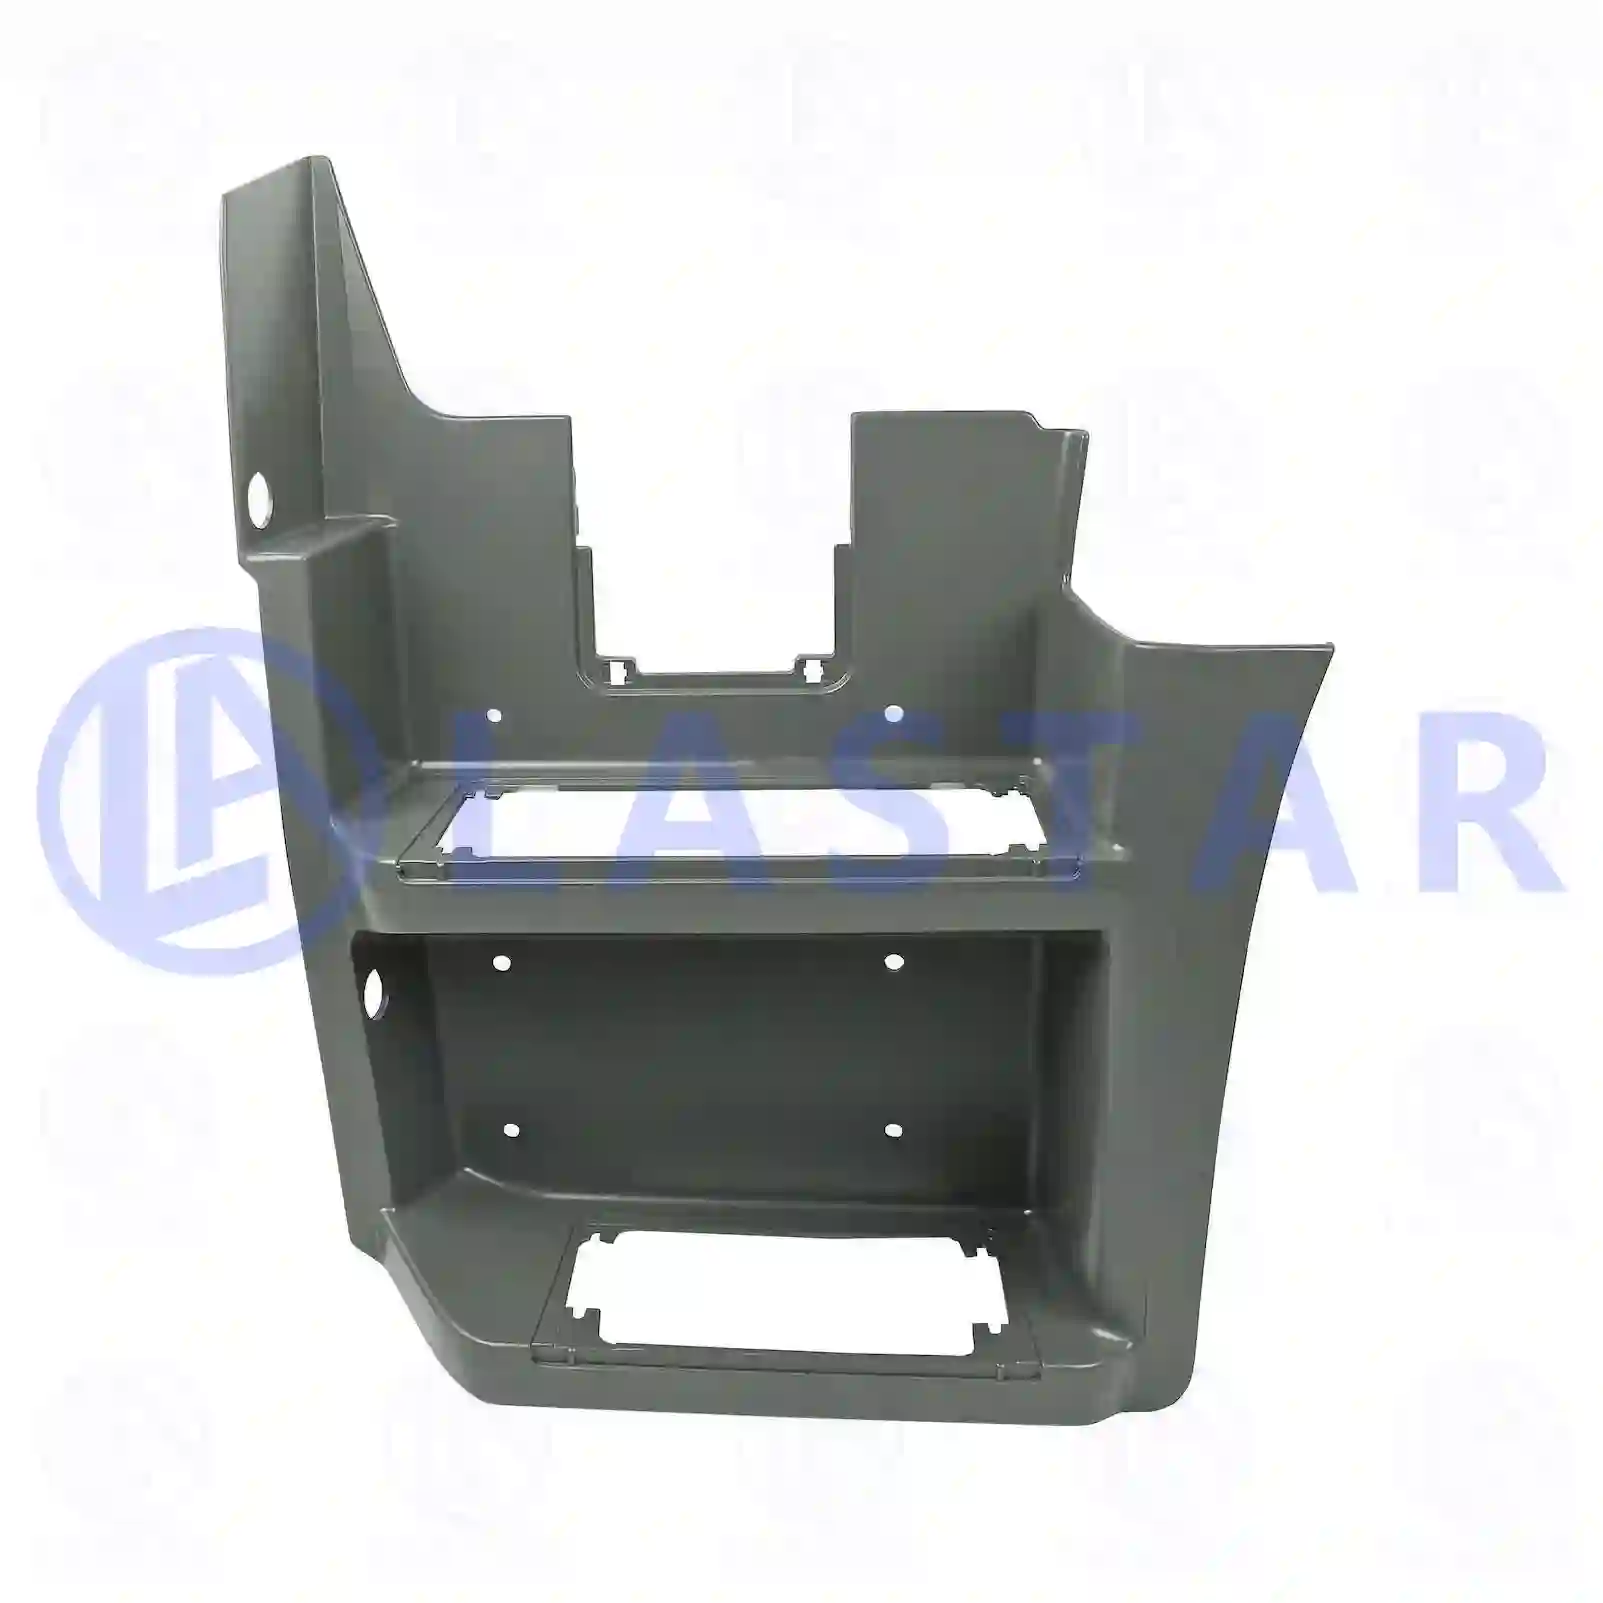 Step well case, lower, left, 77719052, 9406662401 ||  77719052 Lastar Spare Part | Truck Spare Parts, Auotomotive Spare Parts Step well case, lower, left, 77719052, 9406662401 ||  77719052 Lastar Spare Part | Truck Spare Parts, Auotomotive Spare Parts